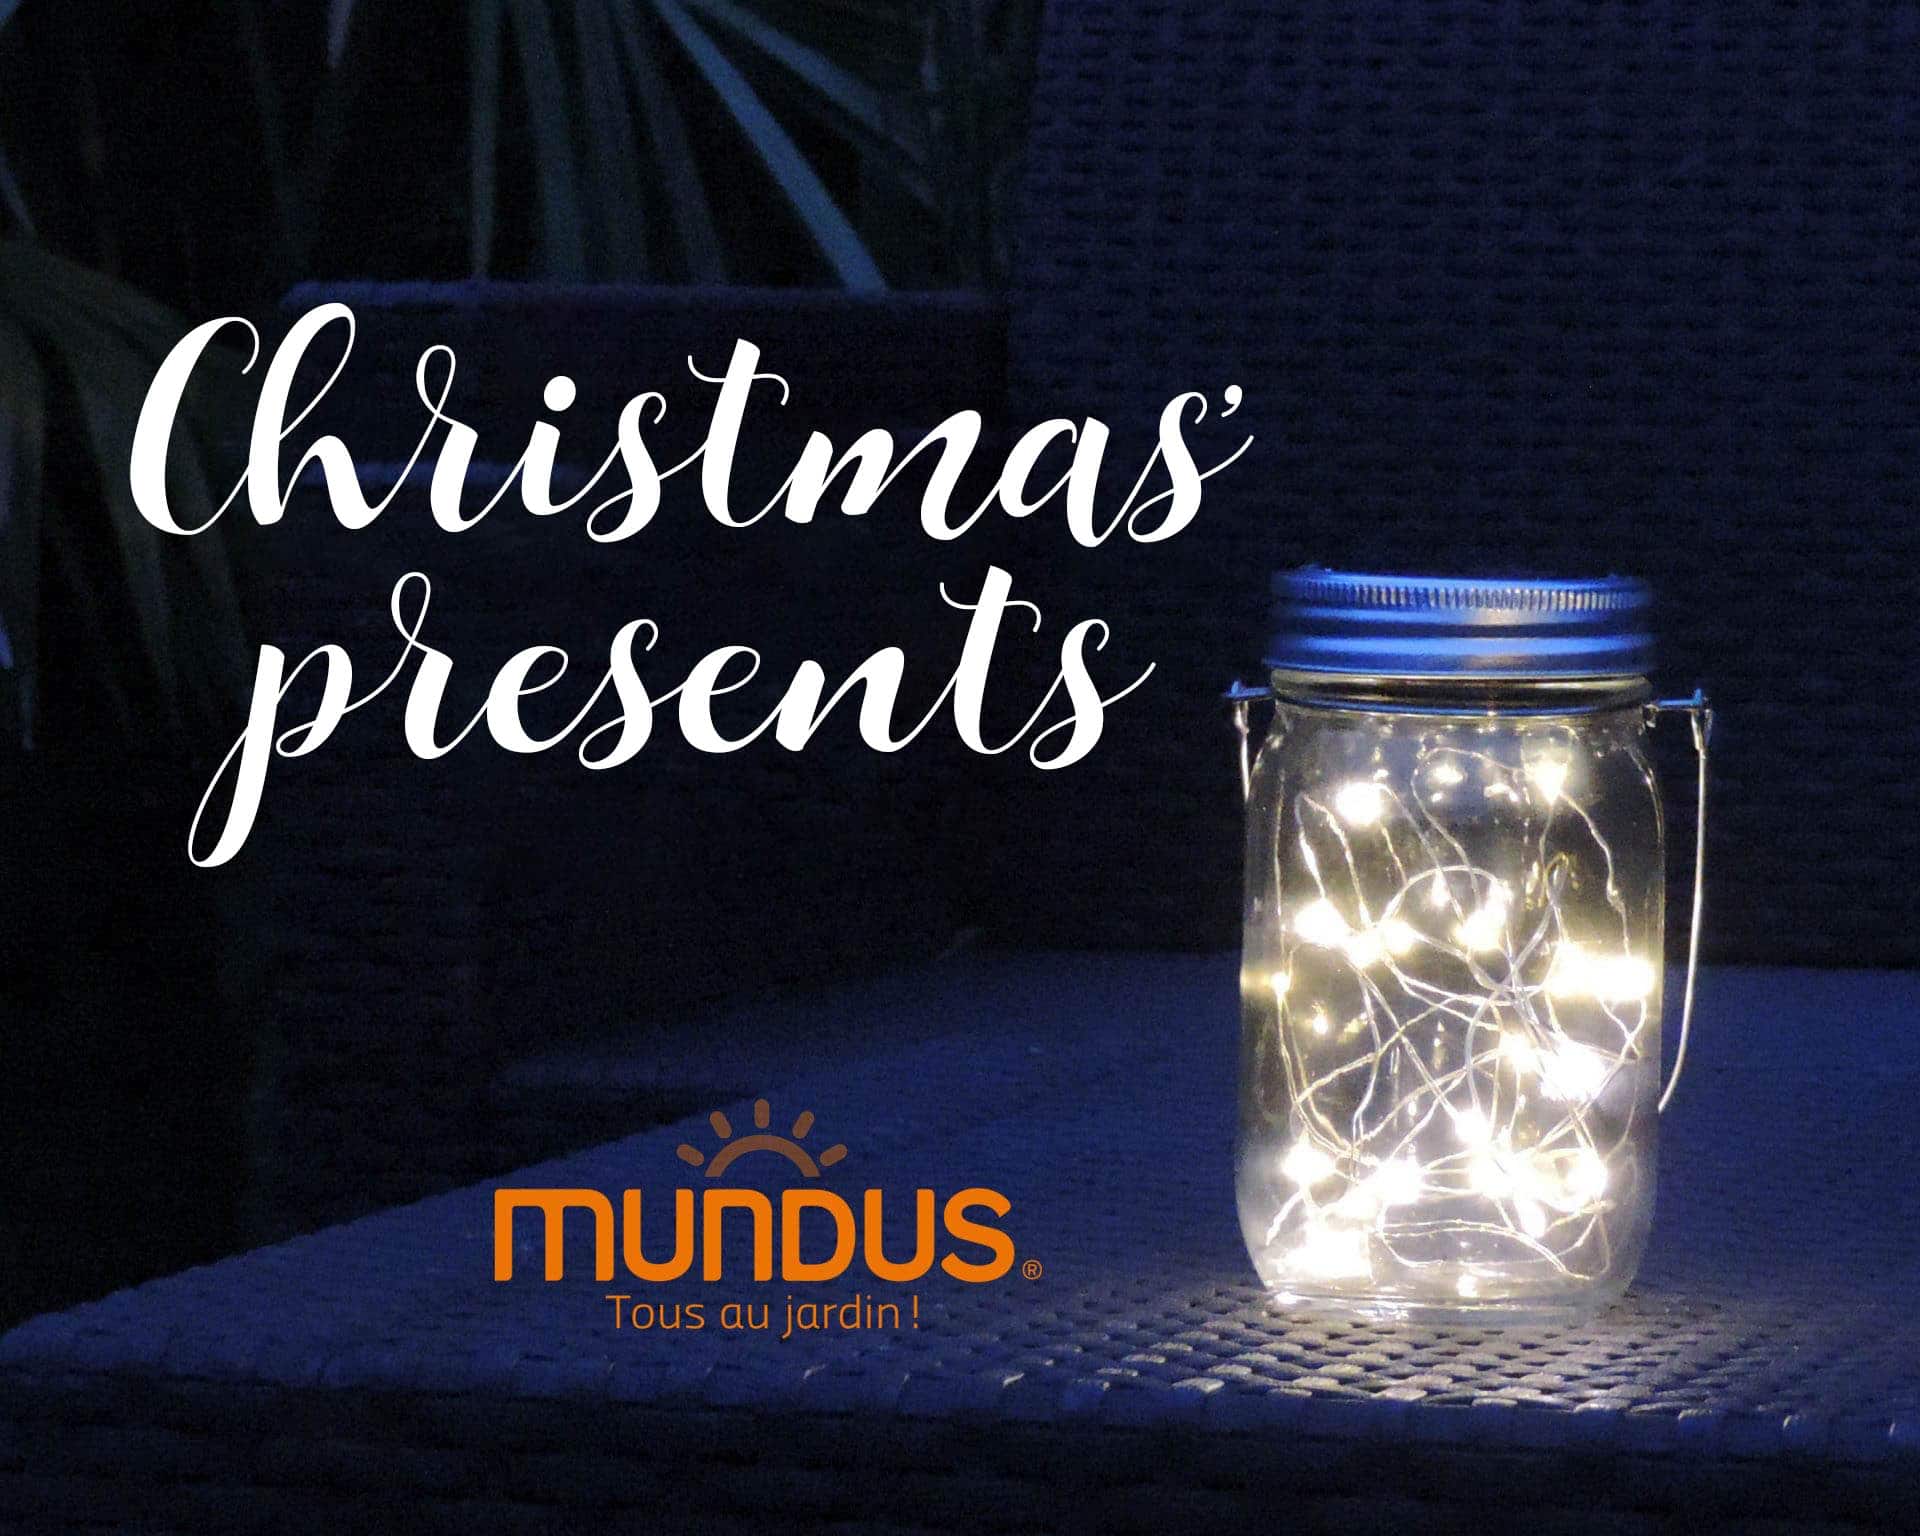 MUNDUS®,  Bright and Magical decorations for Christmas!